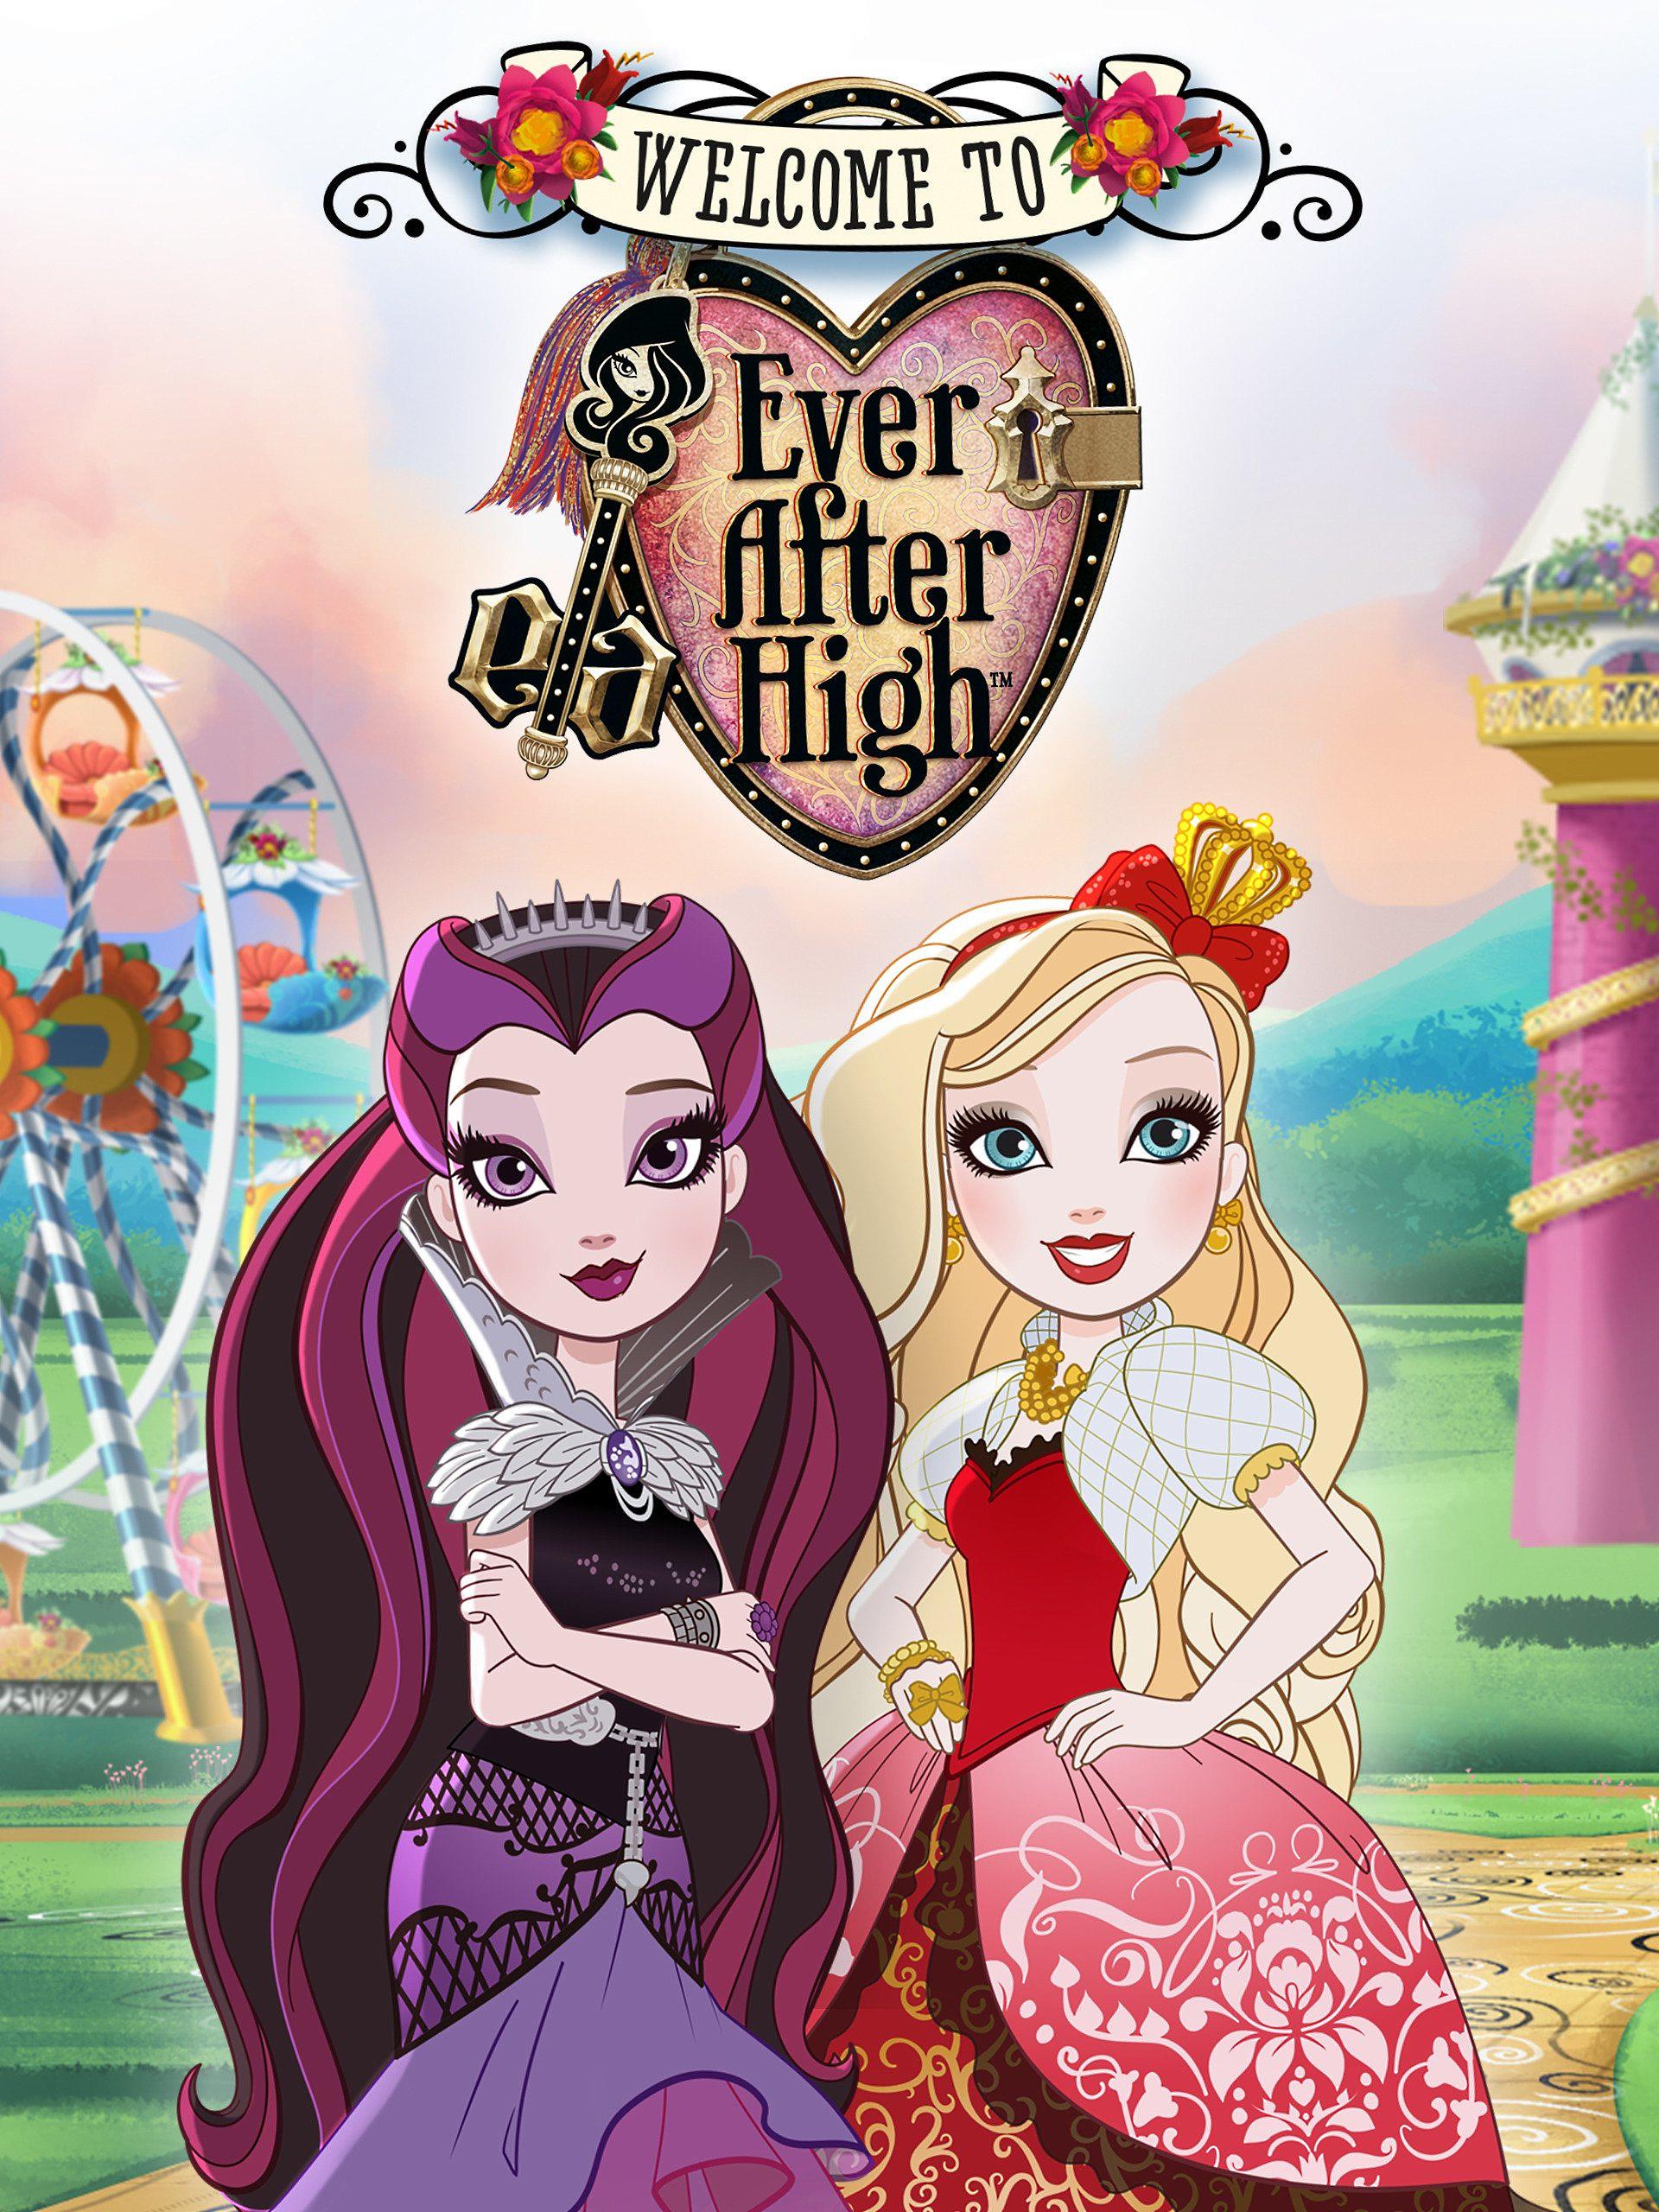 Ever After High (TV Series 2013–2017)